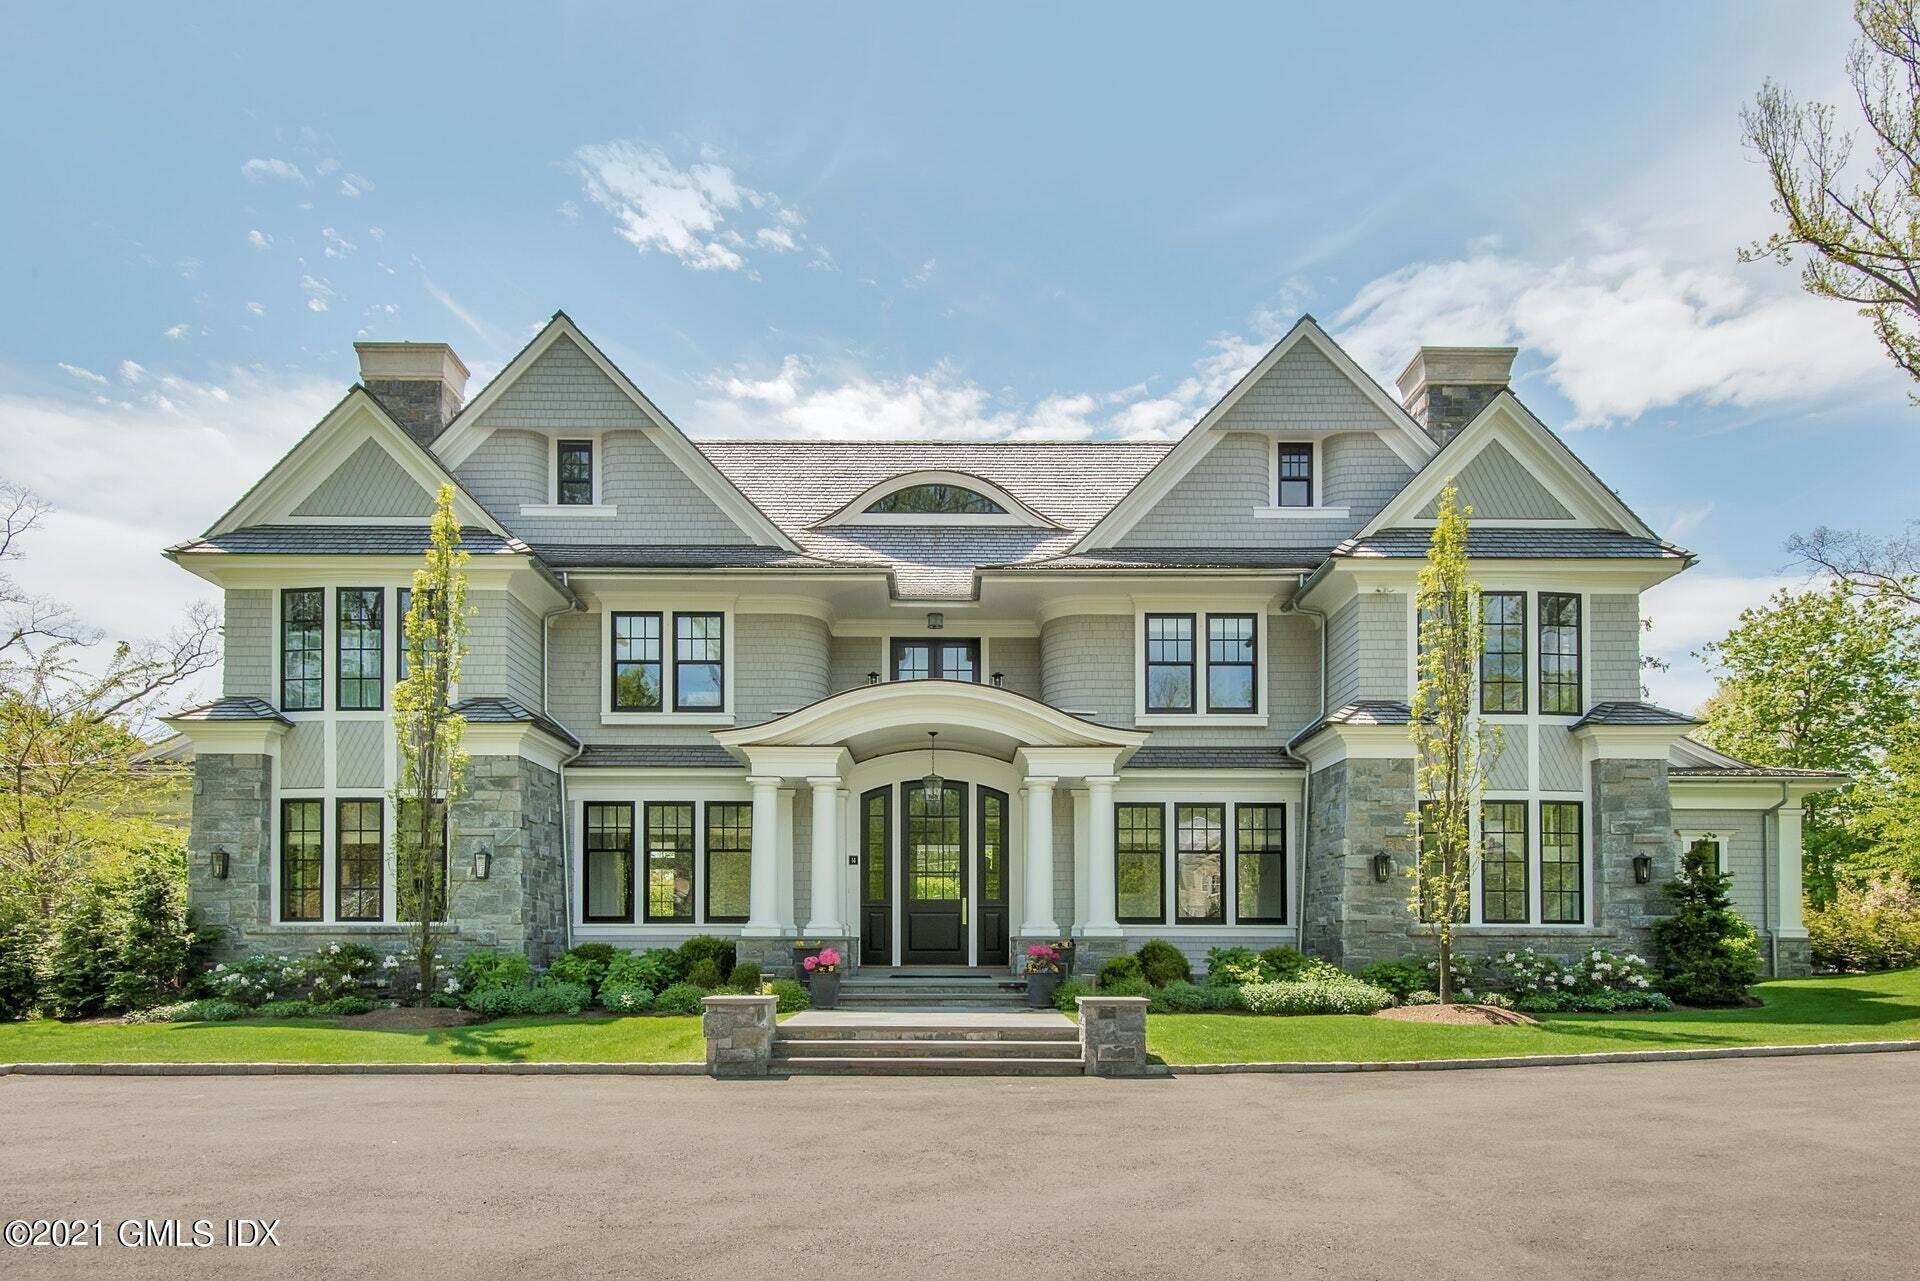 This stylish colonial is coastal living at it's best.